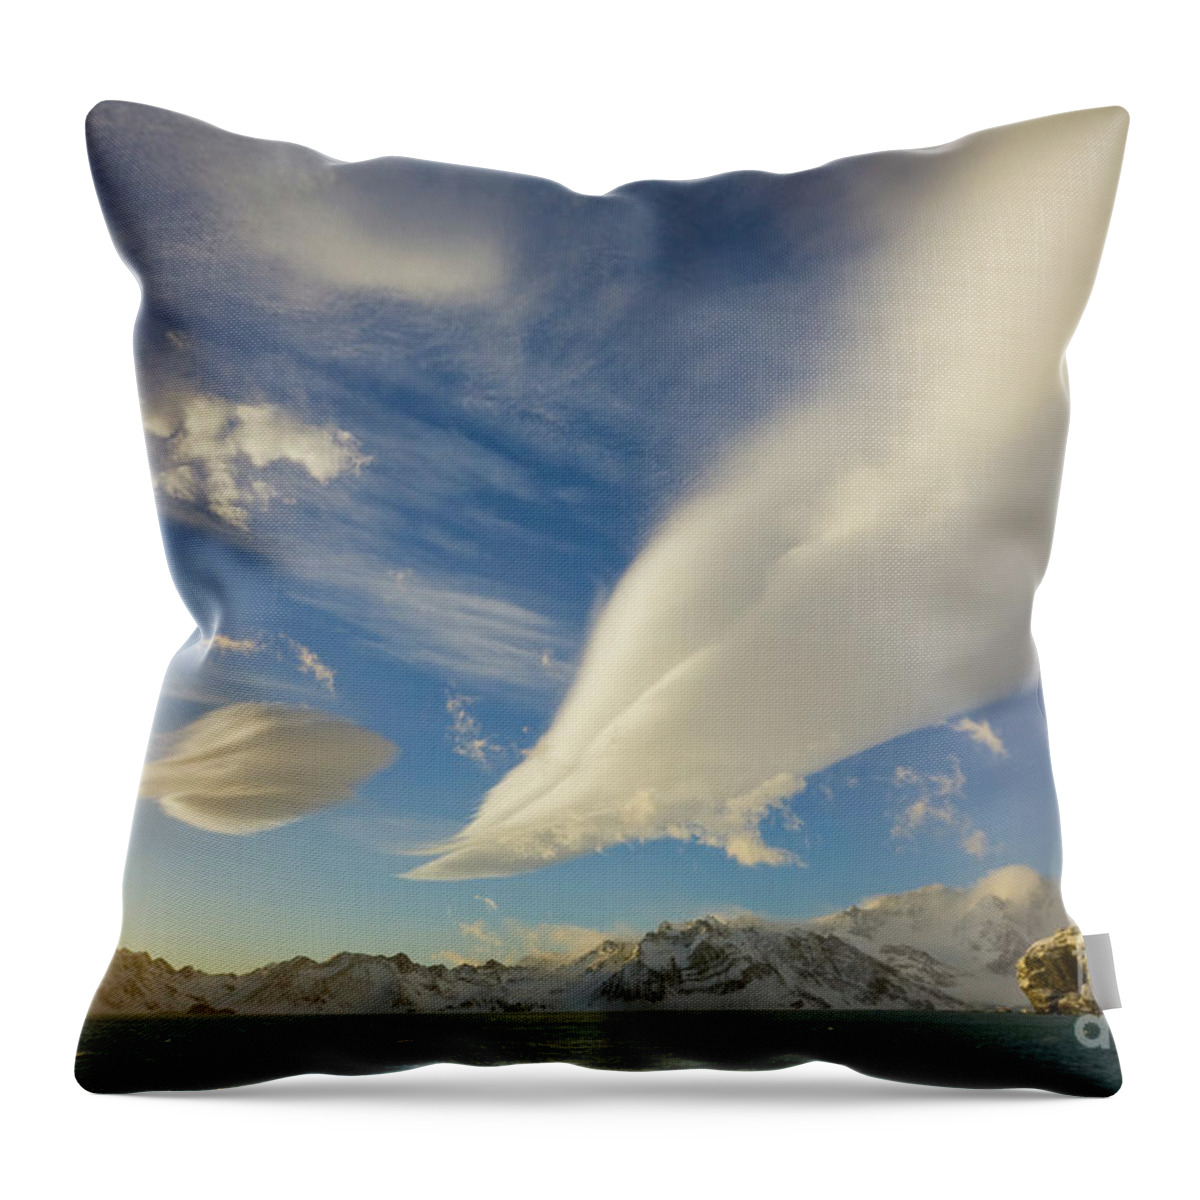 00345948 Throw Pillow featuring the photograph Dramatic Lenticular Clouds by Yva Momatiuk John Eastcott